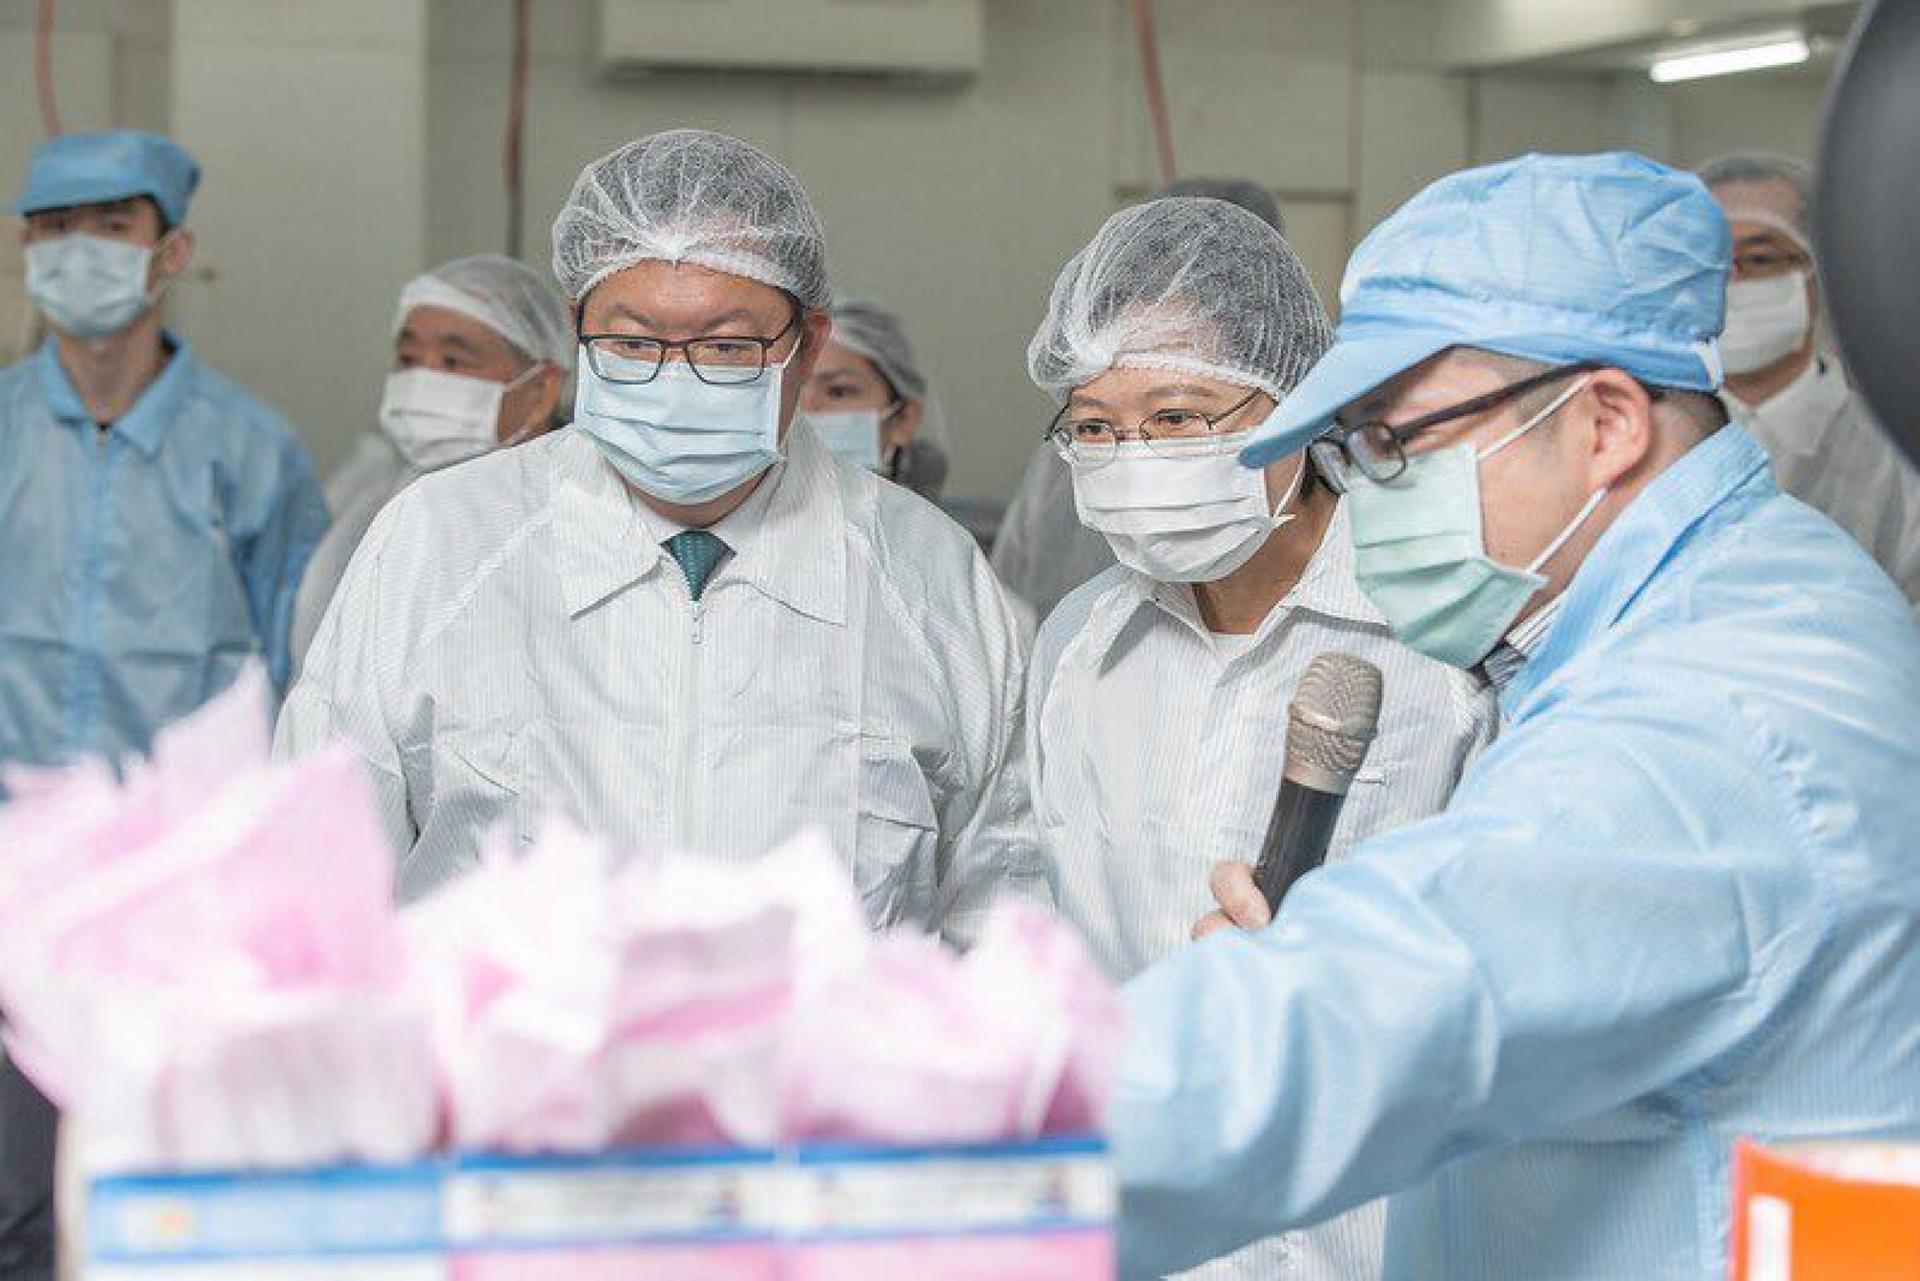 Taiwanese President Tsai Ing-wen (second from right) visited a mask manufacturing plant in Taoyuan, Taiwan, on March 9, 2020.